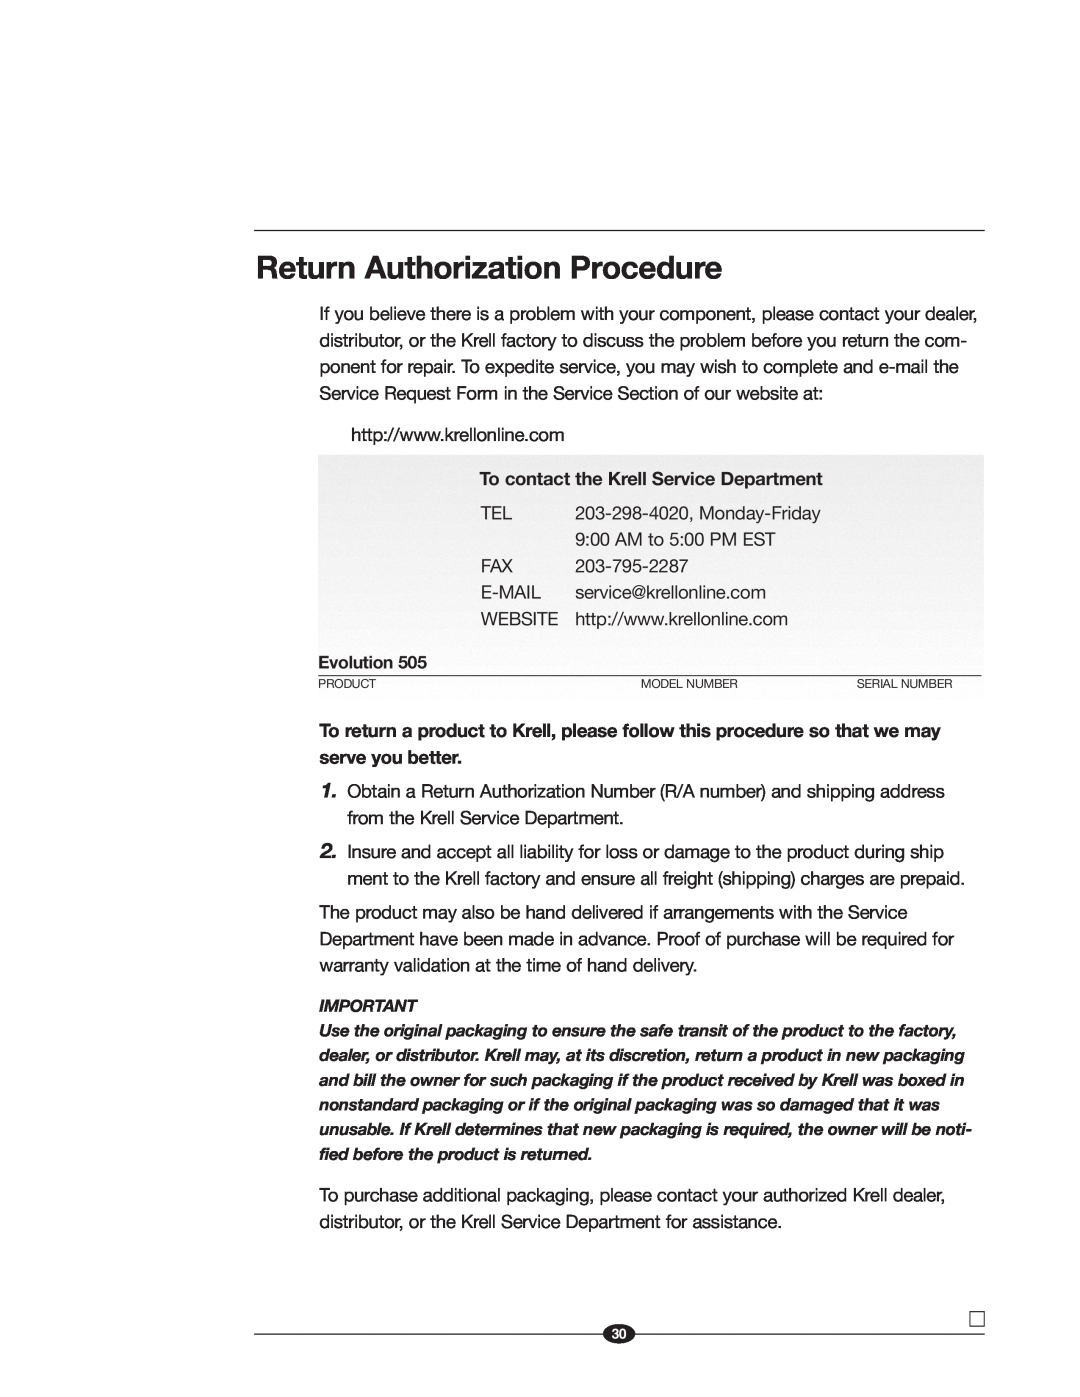 Krell Industries 505 manual Return Authorization Procedure, To contact the Krell Service Department, serve you better 